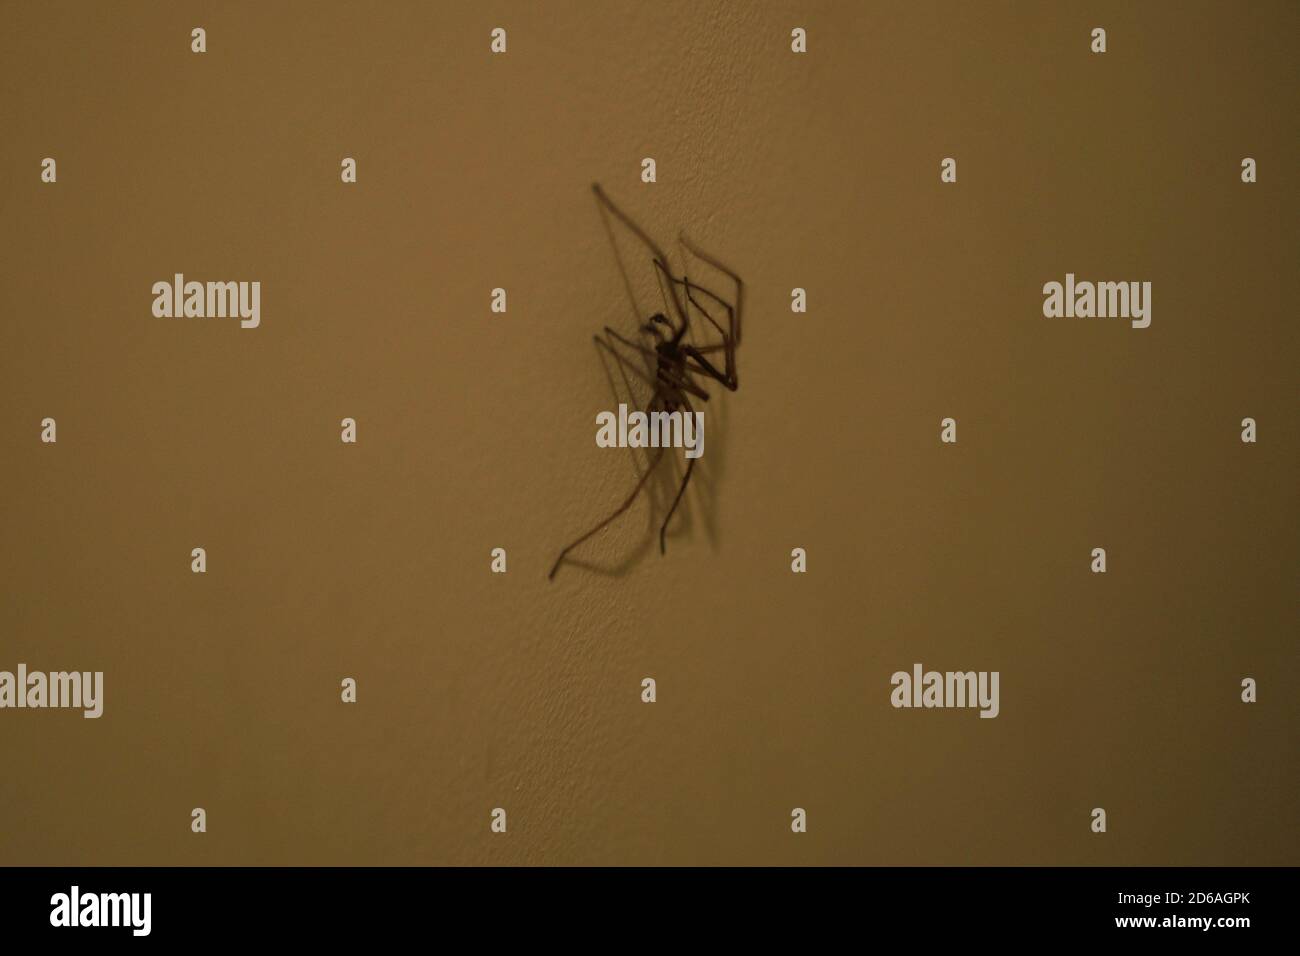 Spider magnified climbing up the wall. Stock Photo